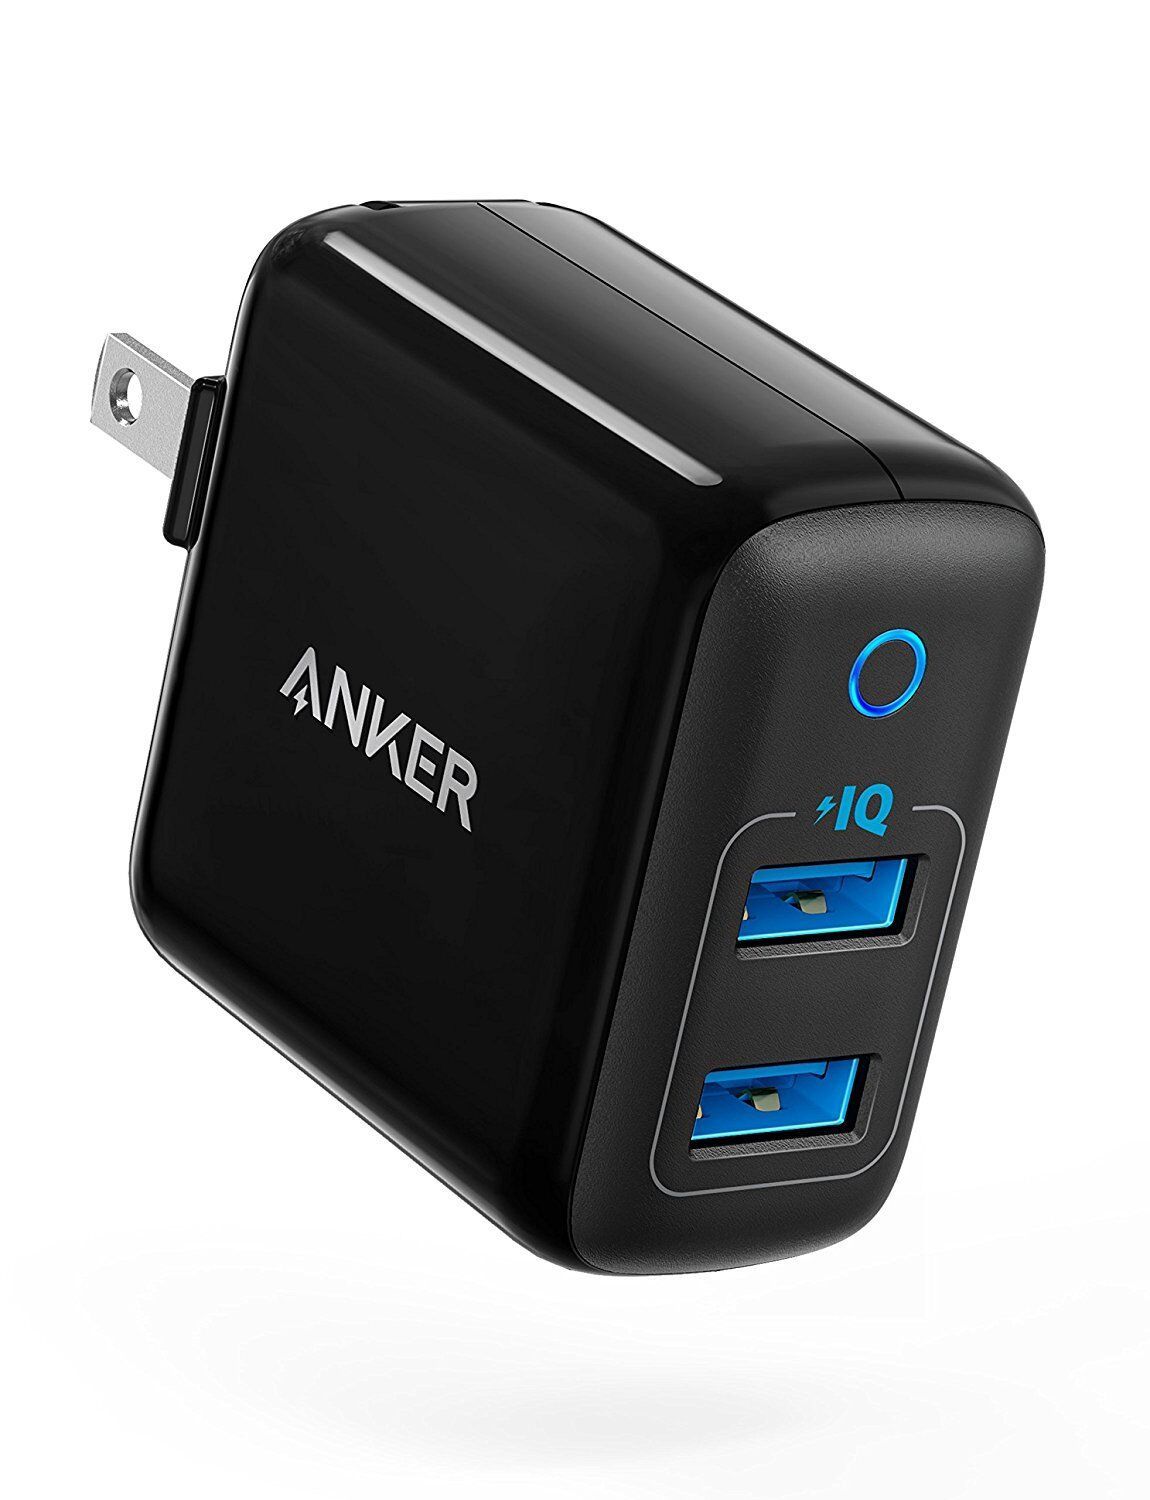 [Upgraded] Anker PowerPort II with Dual PowerIQ Ports, 24W Ultra-Compact Charger - $34.99